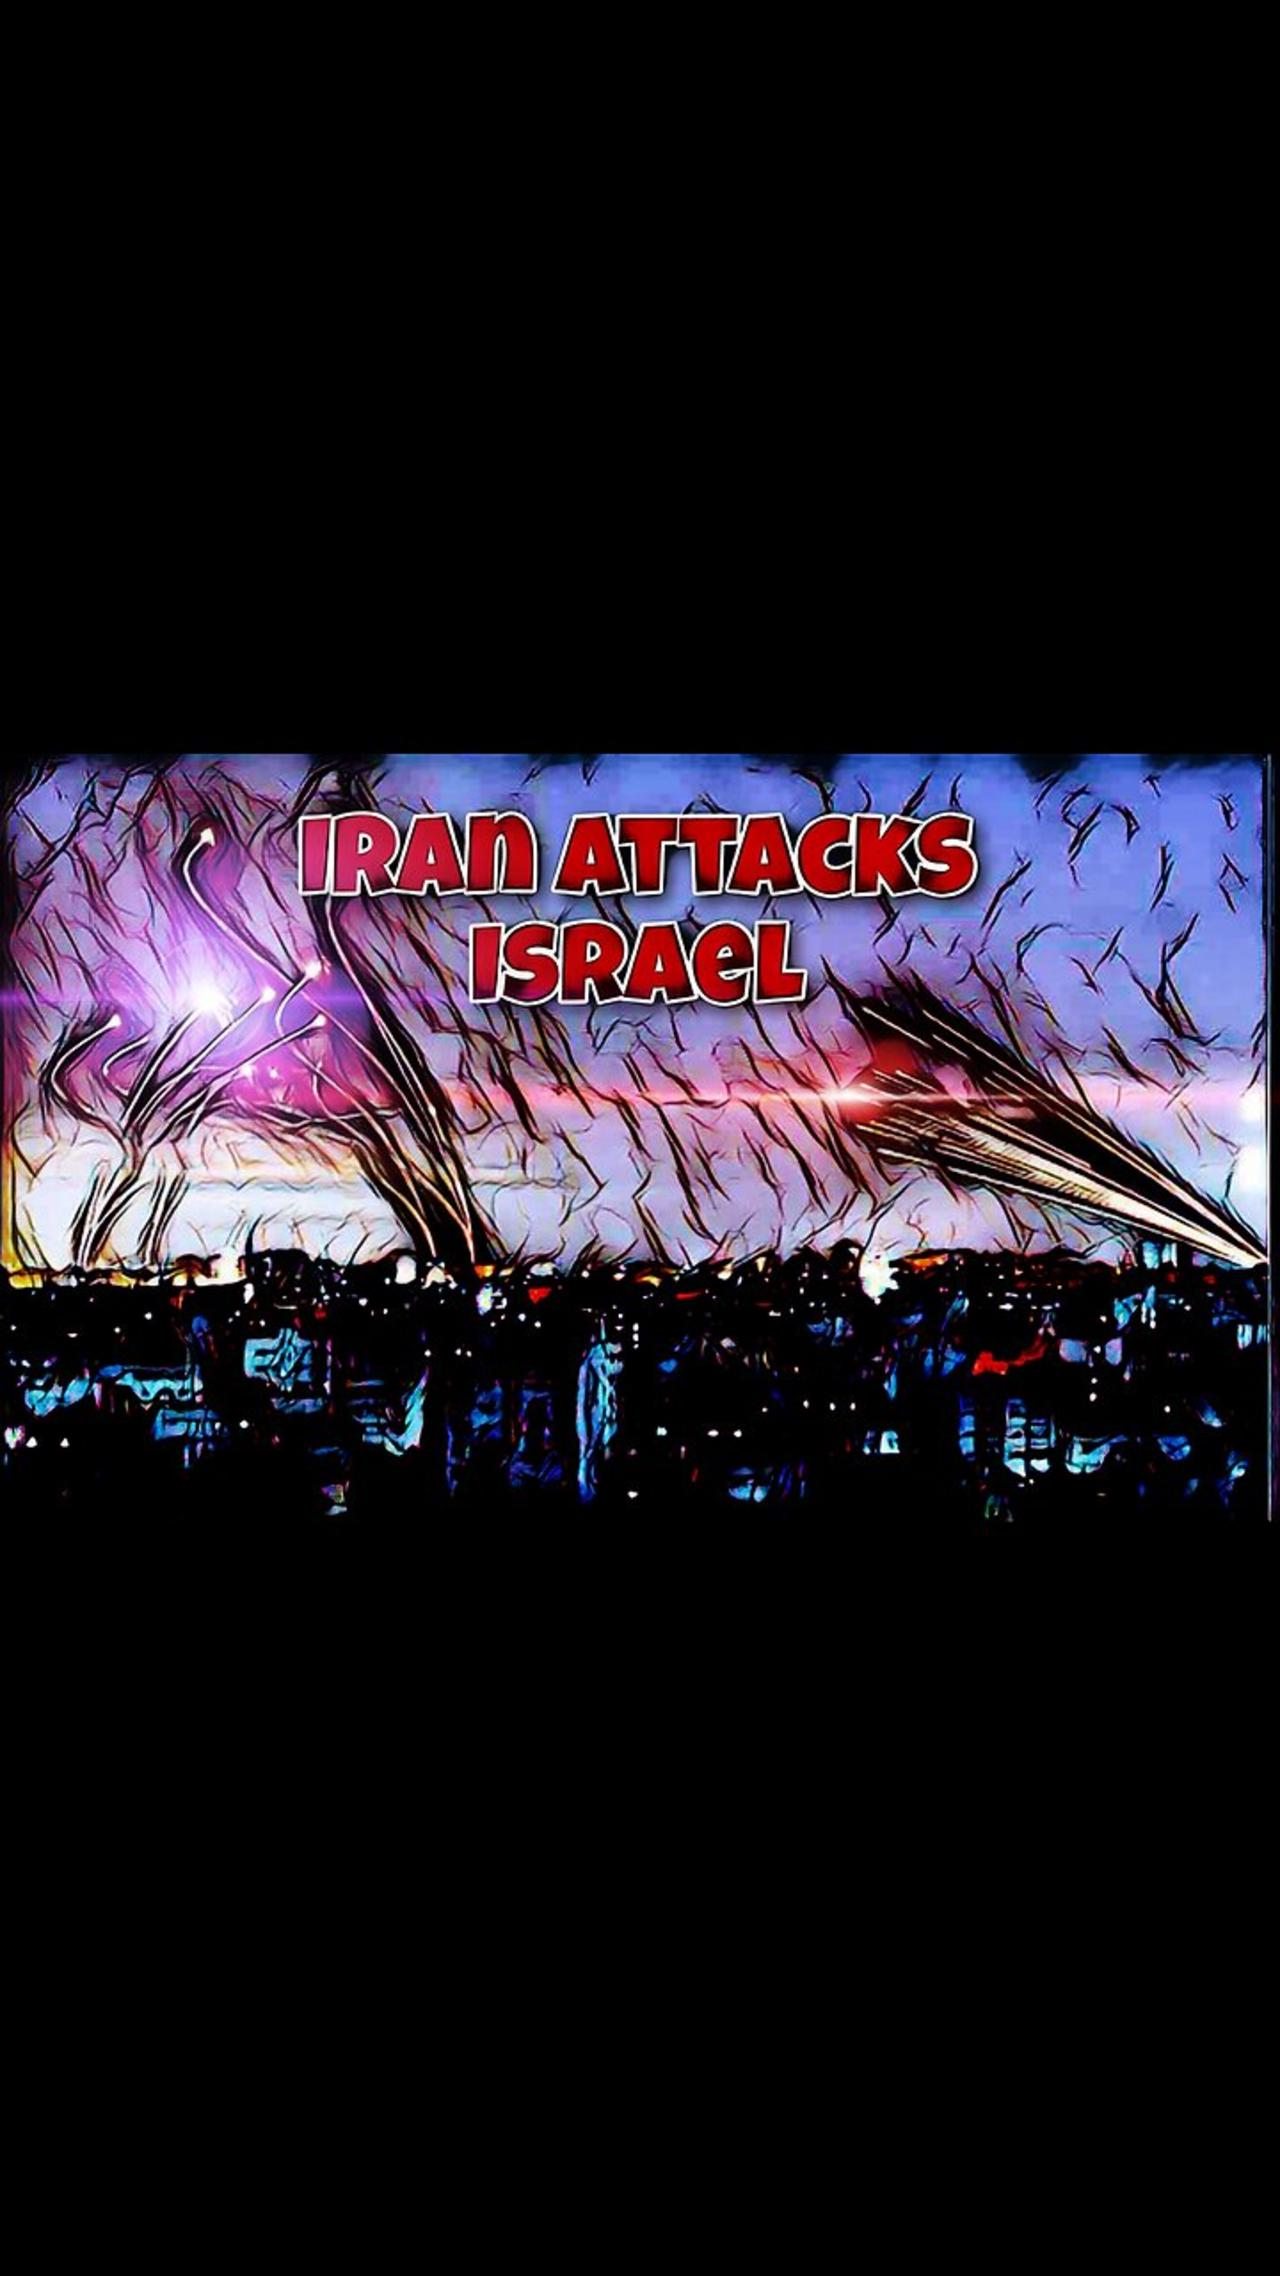 Israel Attacked by Iran